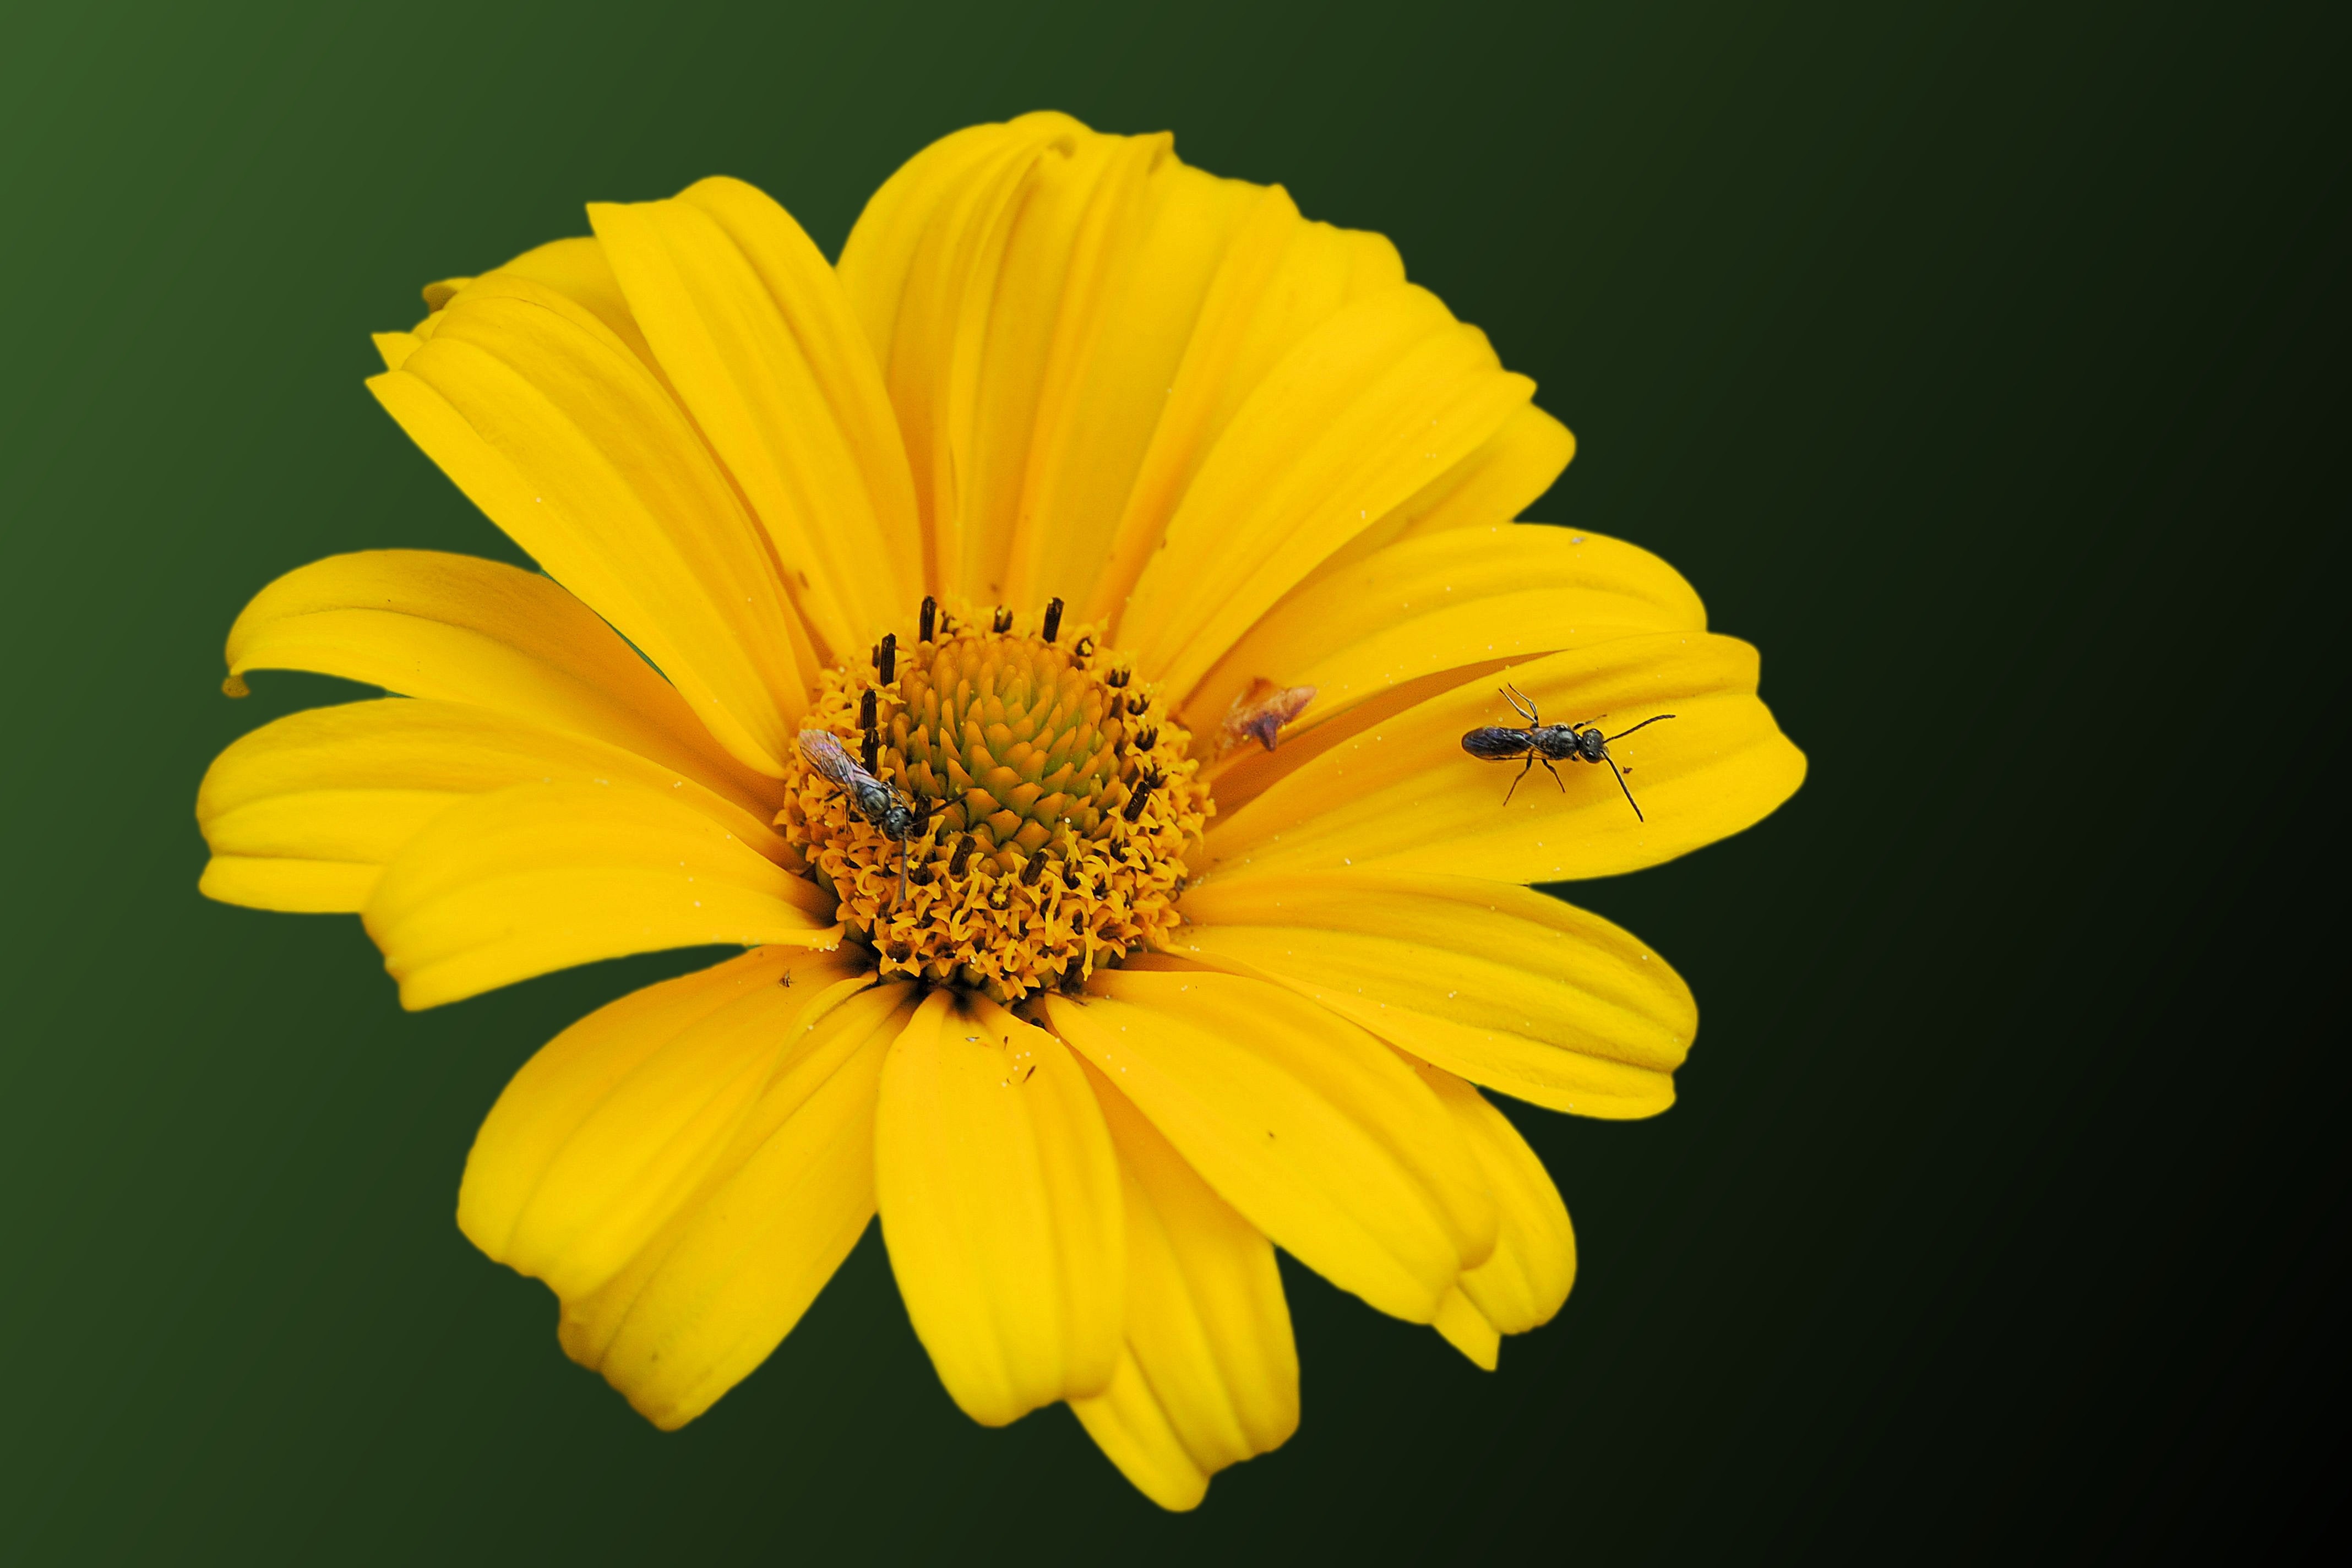 Insect, Bloom, Blossom, Sun Flower, flower, yellow